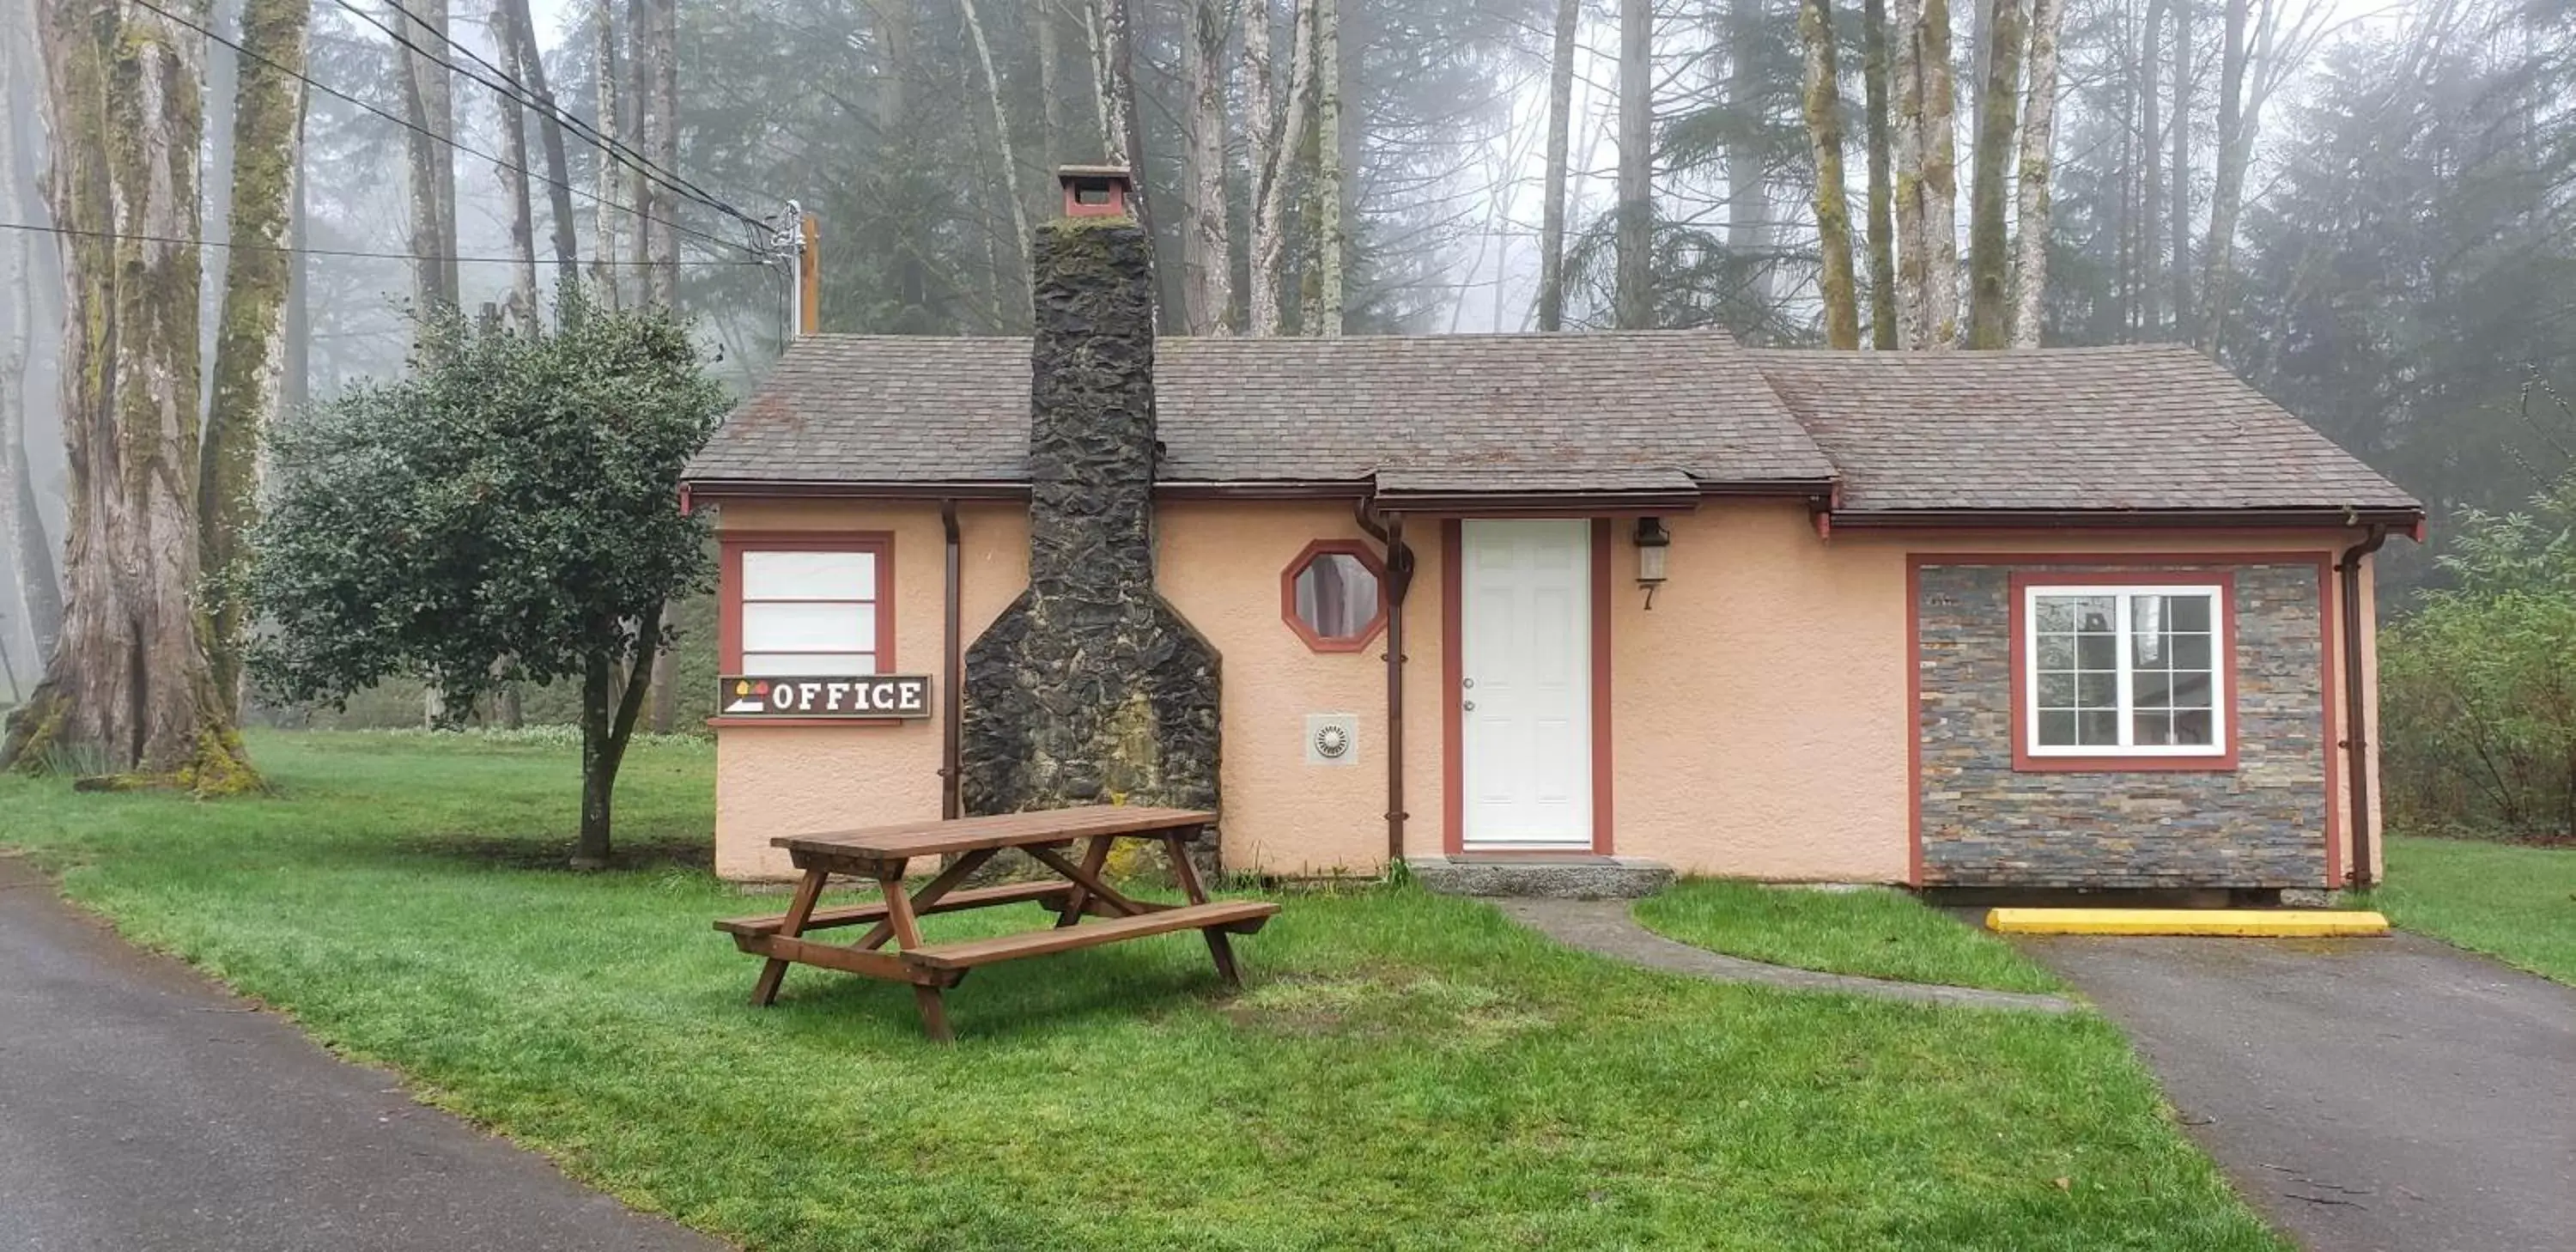 Property Building in Malahat Bungalows Motel